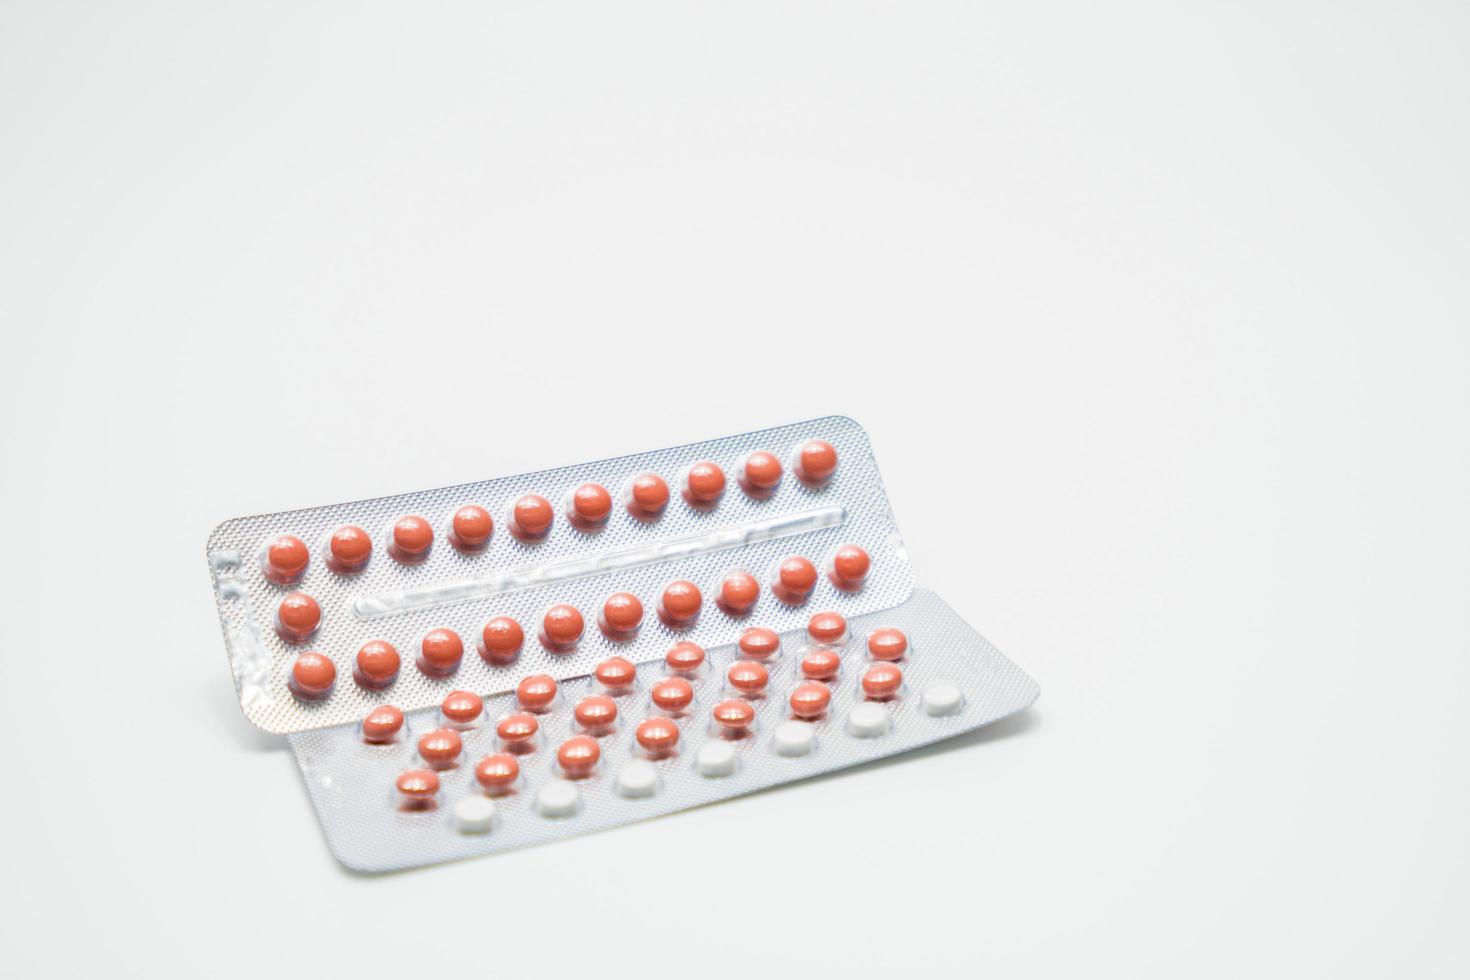 Contraceptive pills in blister pack on white background. Birth control pills 21 and 28 tablets. Hormones tablet pills. Pharmacy drugstore background. Pharmaceutical product. Estrogen and progesterone. photo